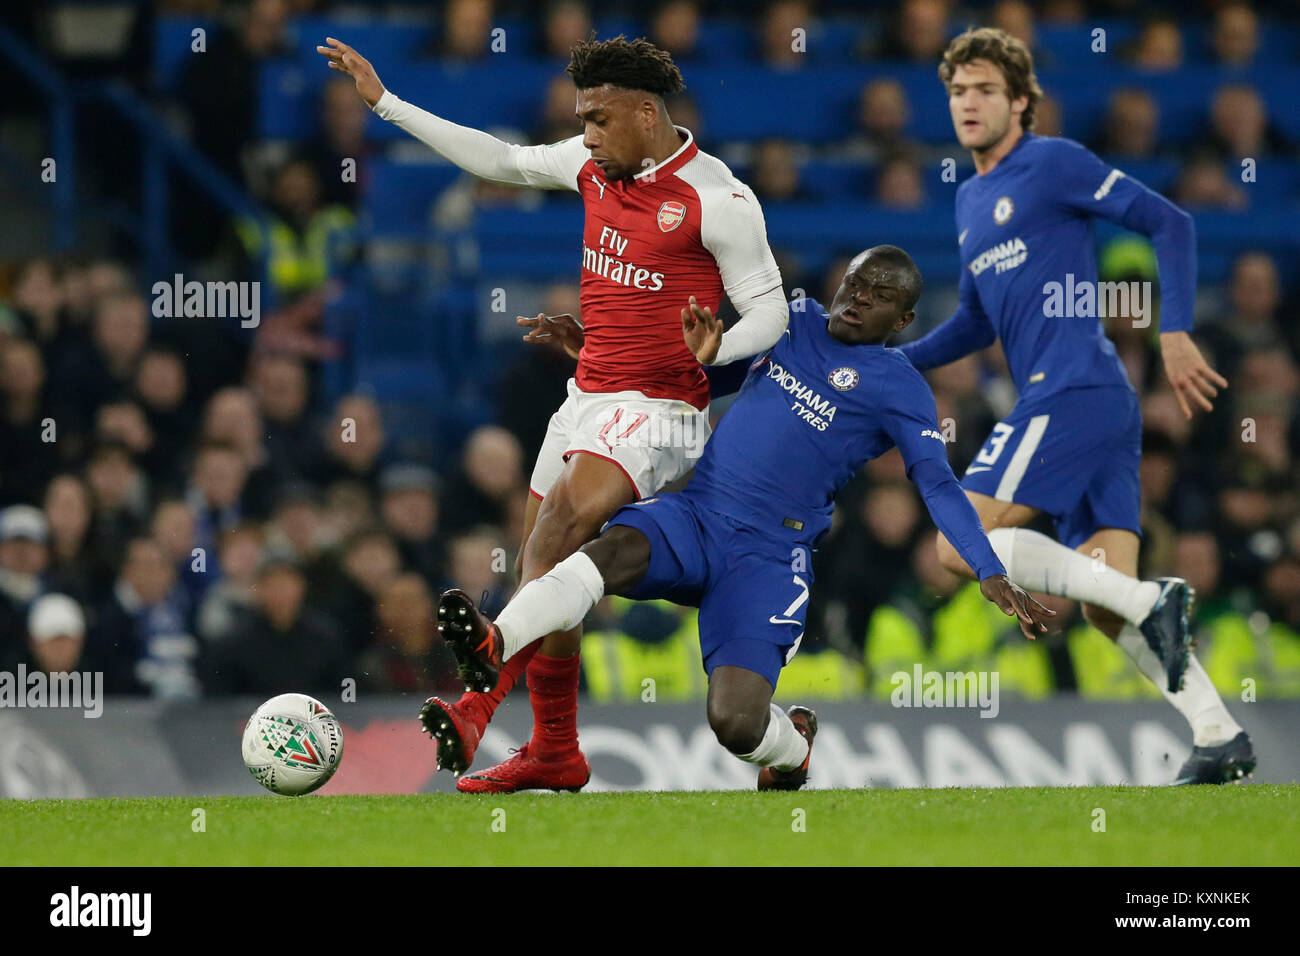 London, UK. 10th Jan, 2018. Arsenal's Alex Iwobi (L) vies with Chelsea's Ngolo Kante during the English League Cup semi-final 1st leg match between Chelsea and Arsenal at Stamford Bridge Stadium in London, Britain on Jan. 10, 2018. Chelsea and Arsenal drew 0-0. Credit: Tim Ireland/Xinhua/Alamy Live News Stock Photo